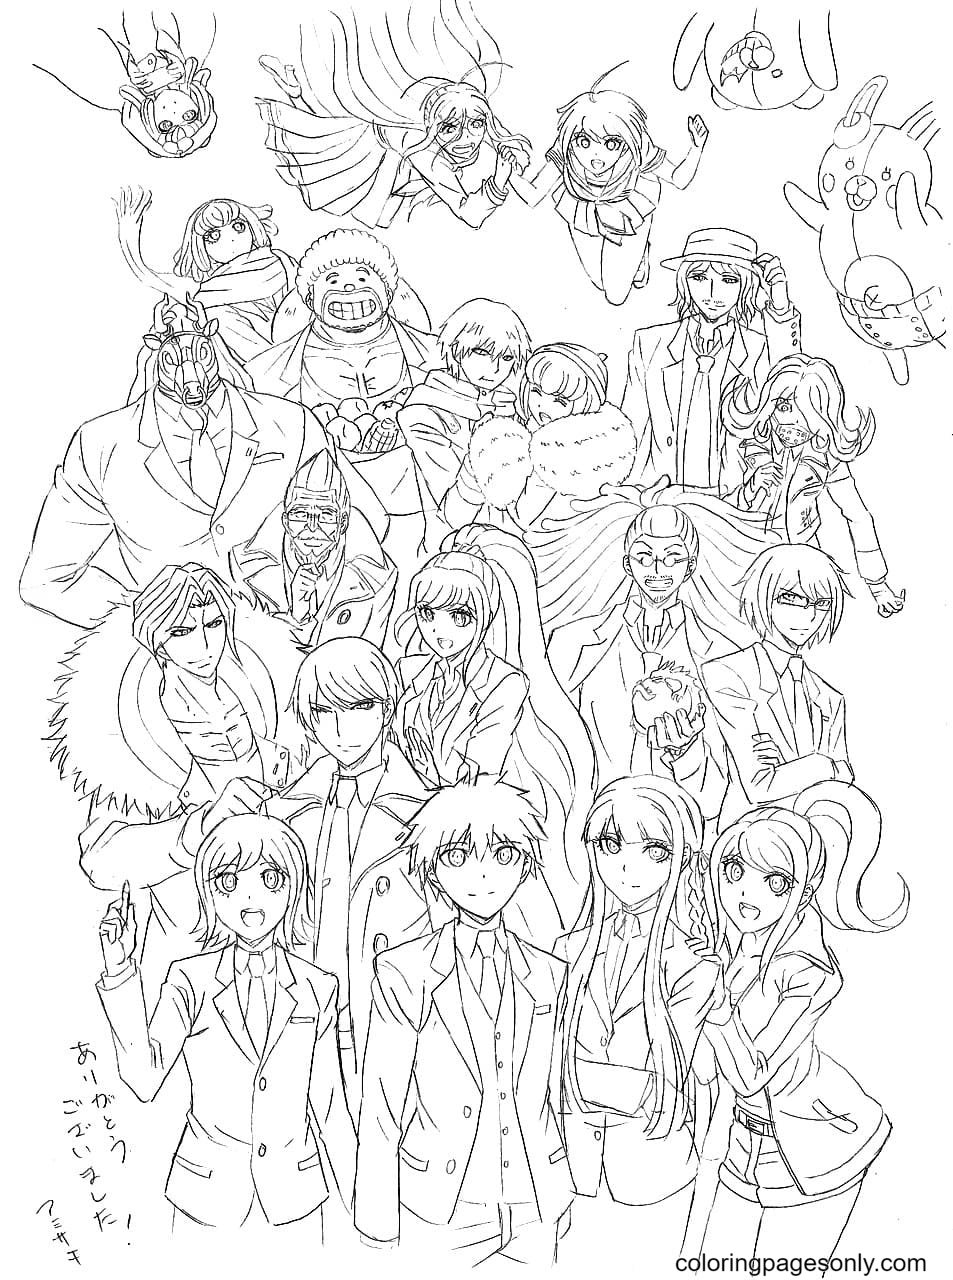 Characters from the anime Danganronpa Coloring Pages   Danganronpa ...